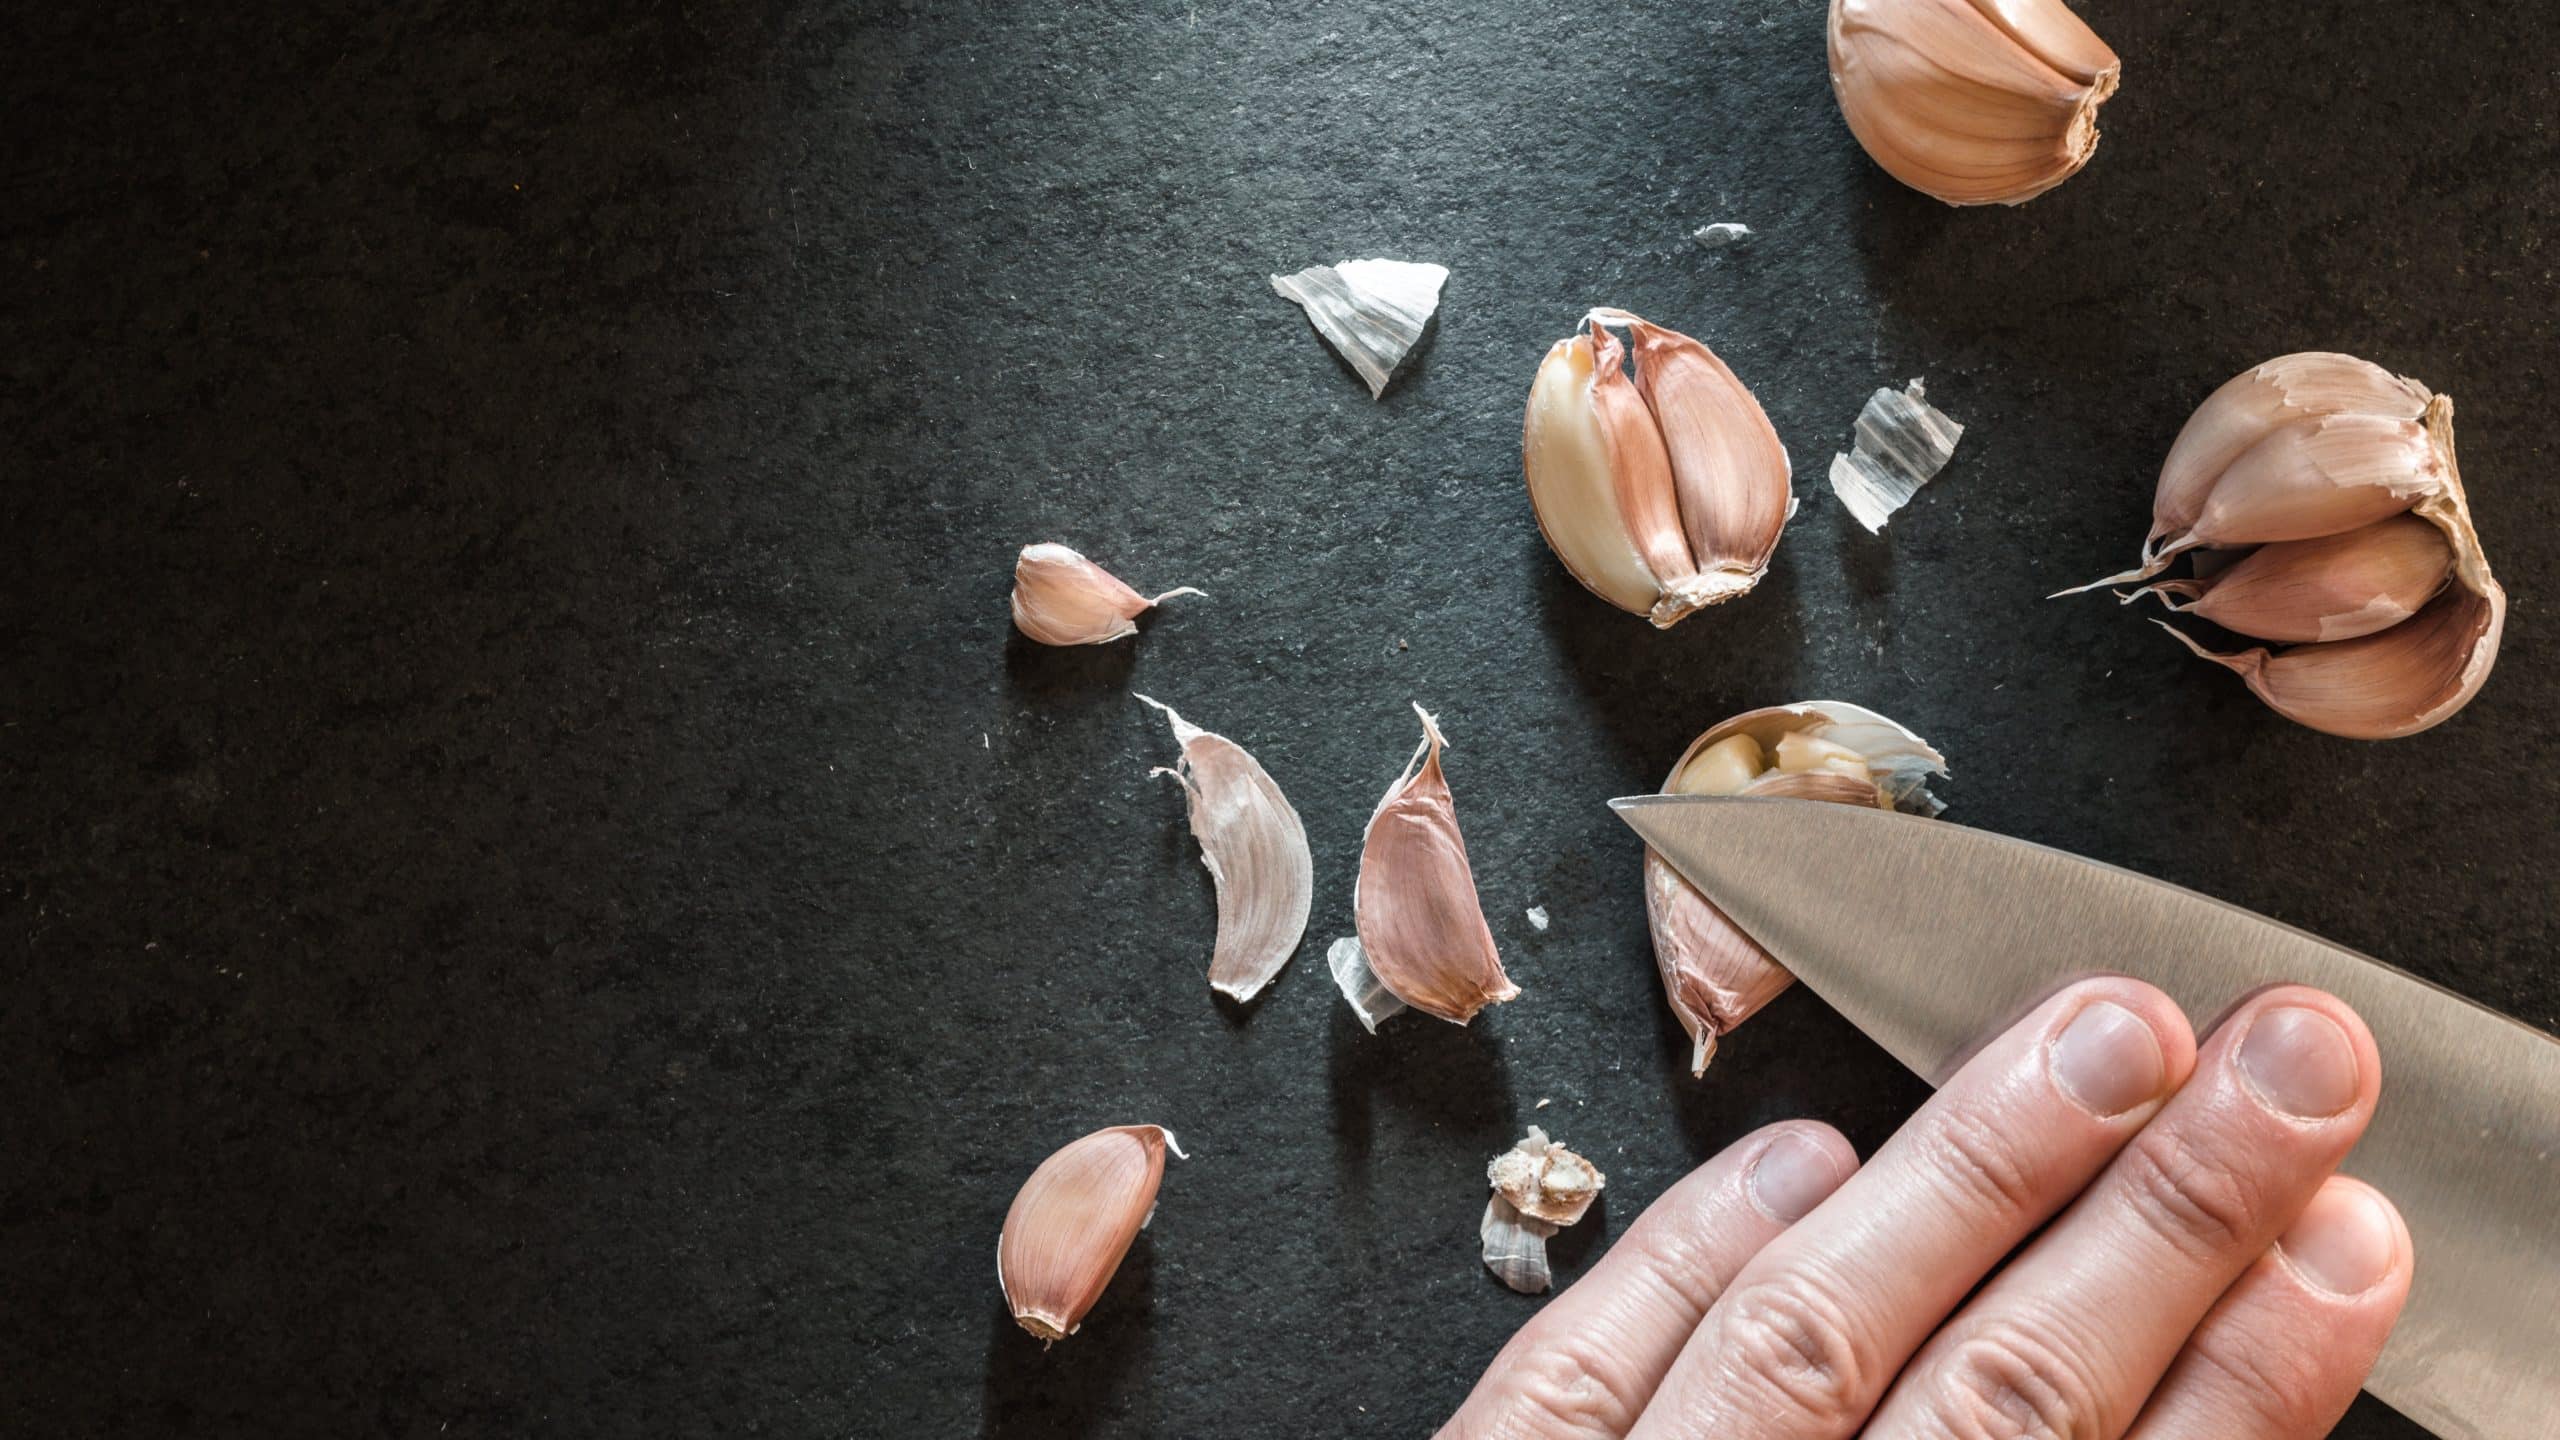 Peeling the garlic with a knife.